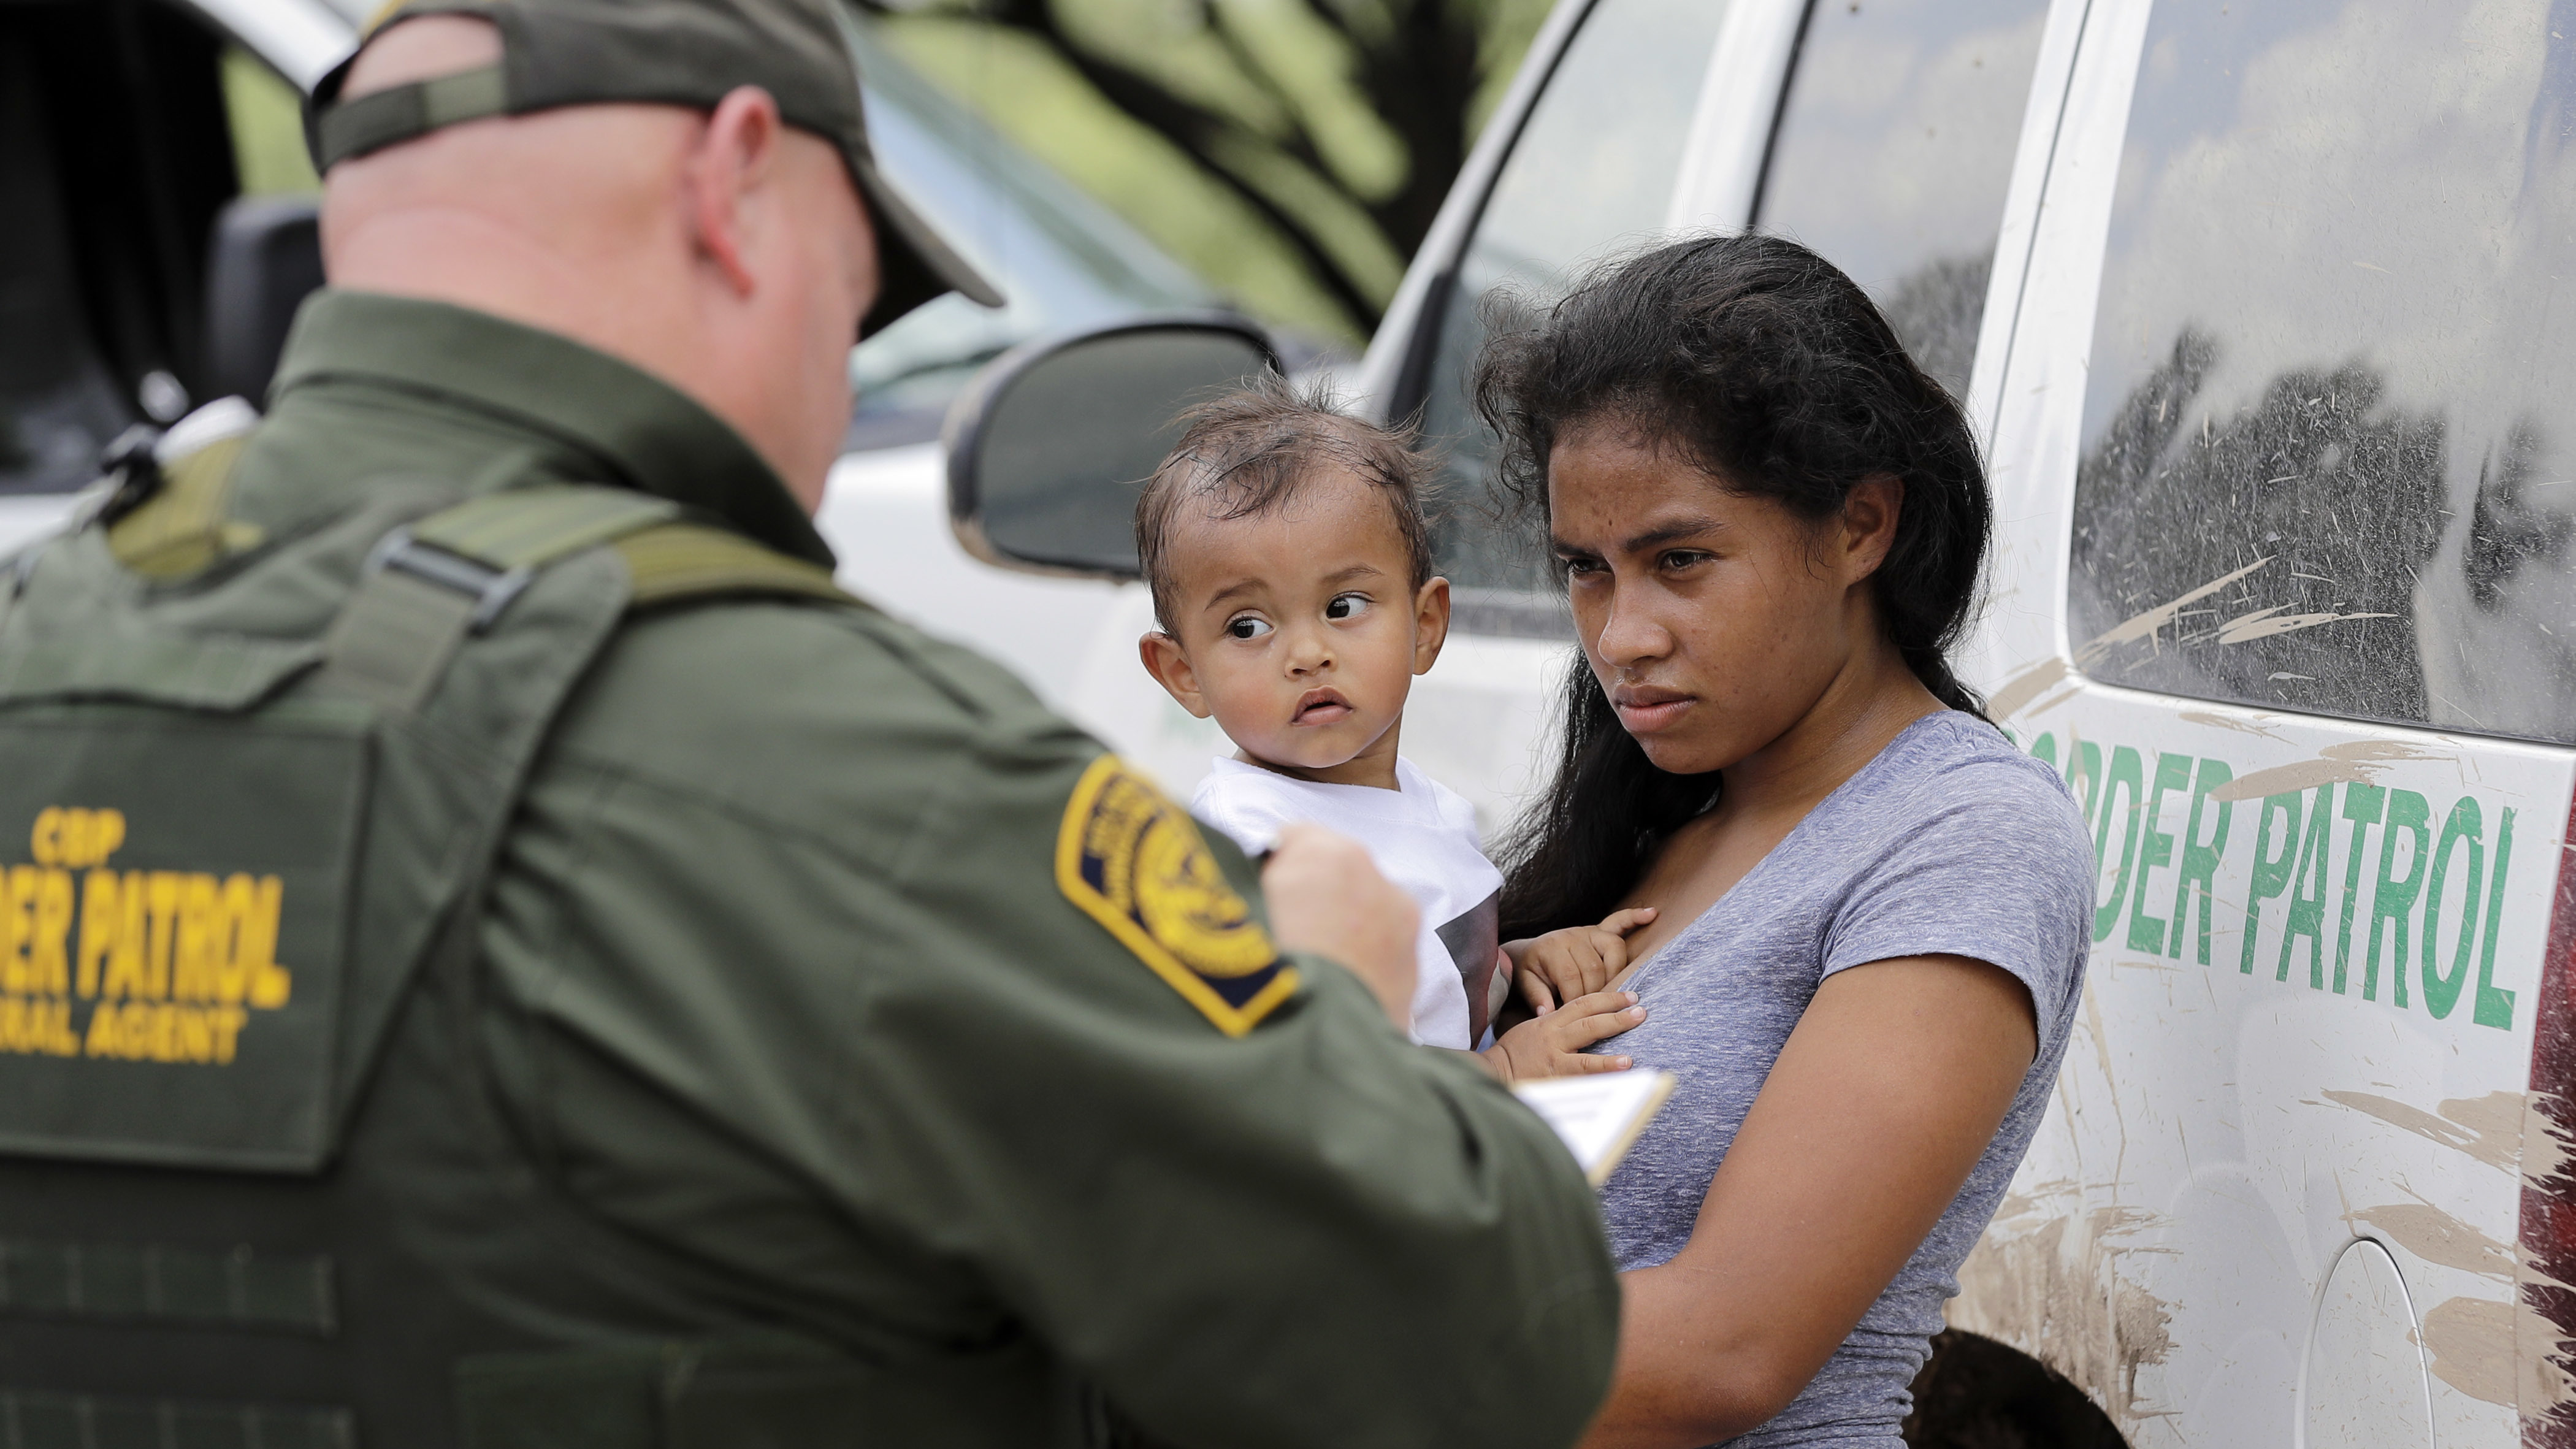 A mother migrating from Honduras holds her 1-year-old child as she surrenders to a U.S. Border Patrol agents after illegally crossing the border, near McAllen, Texas, in late June.
